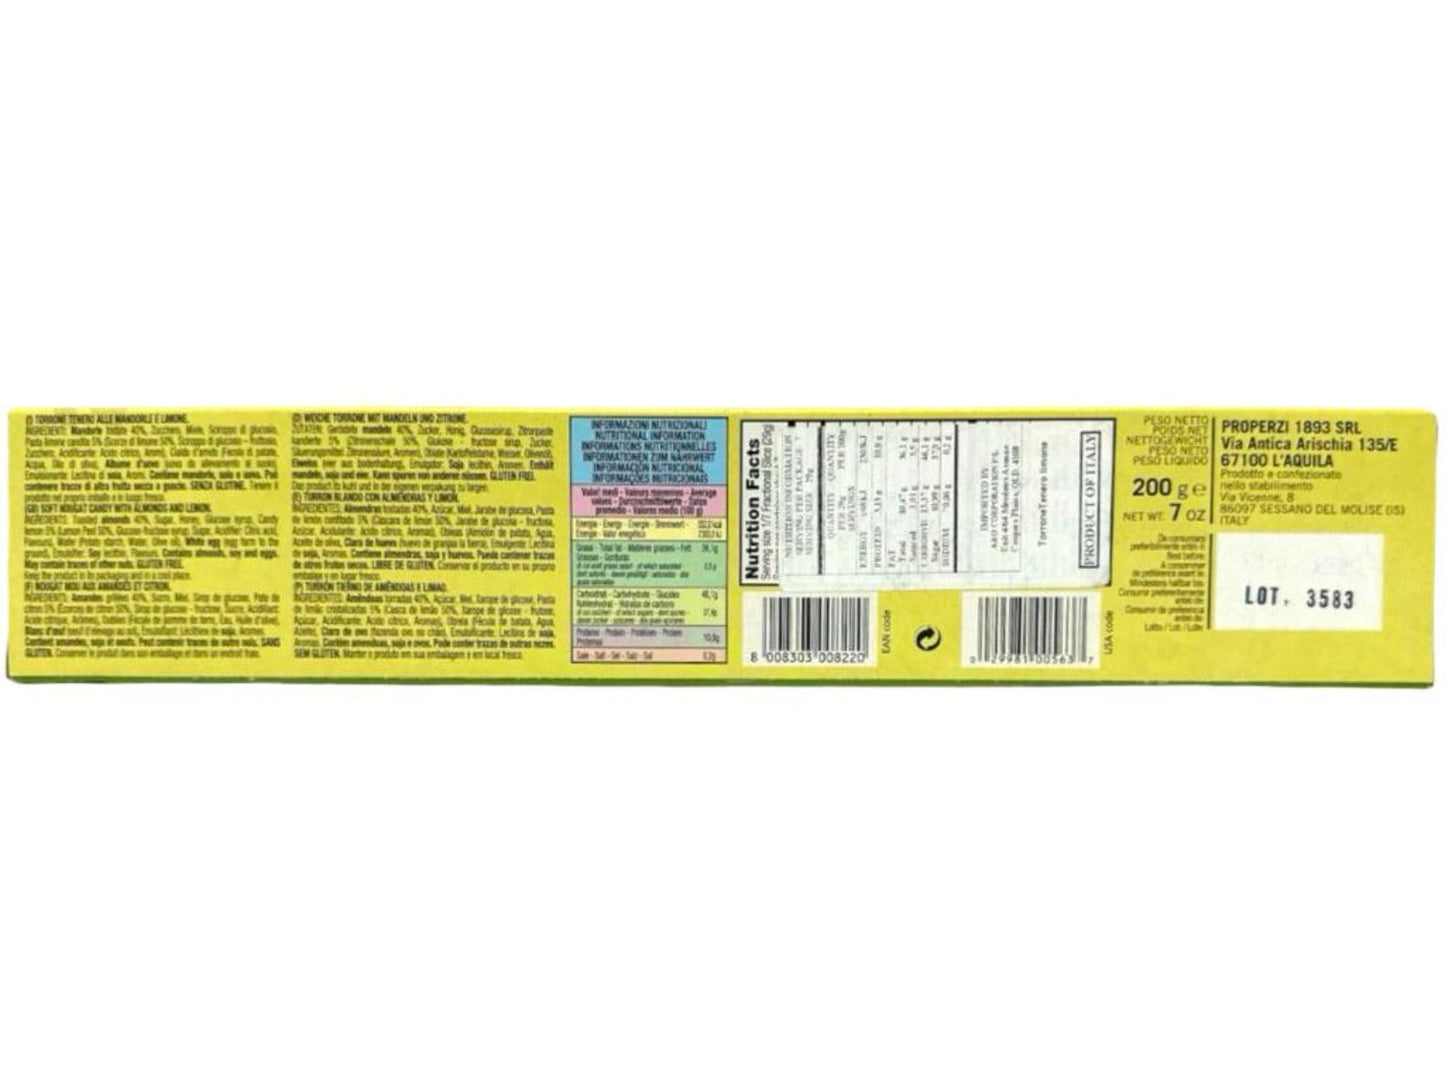 Properzi Italian Soft Nougat Candy With Almonds and Lemon 200g - 2 Pack Total 400g Best Before End of February 2025